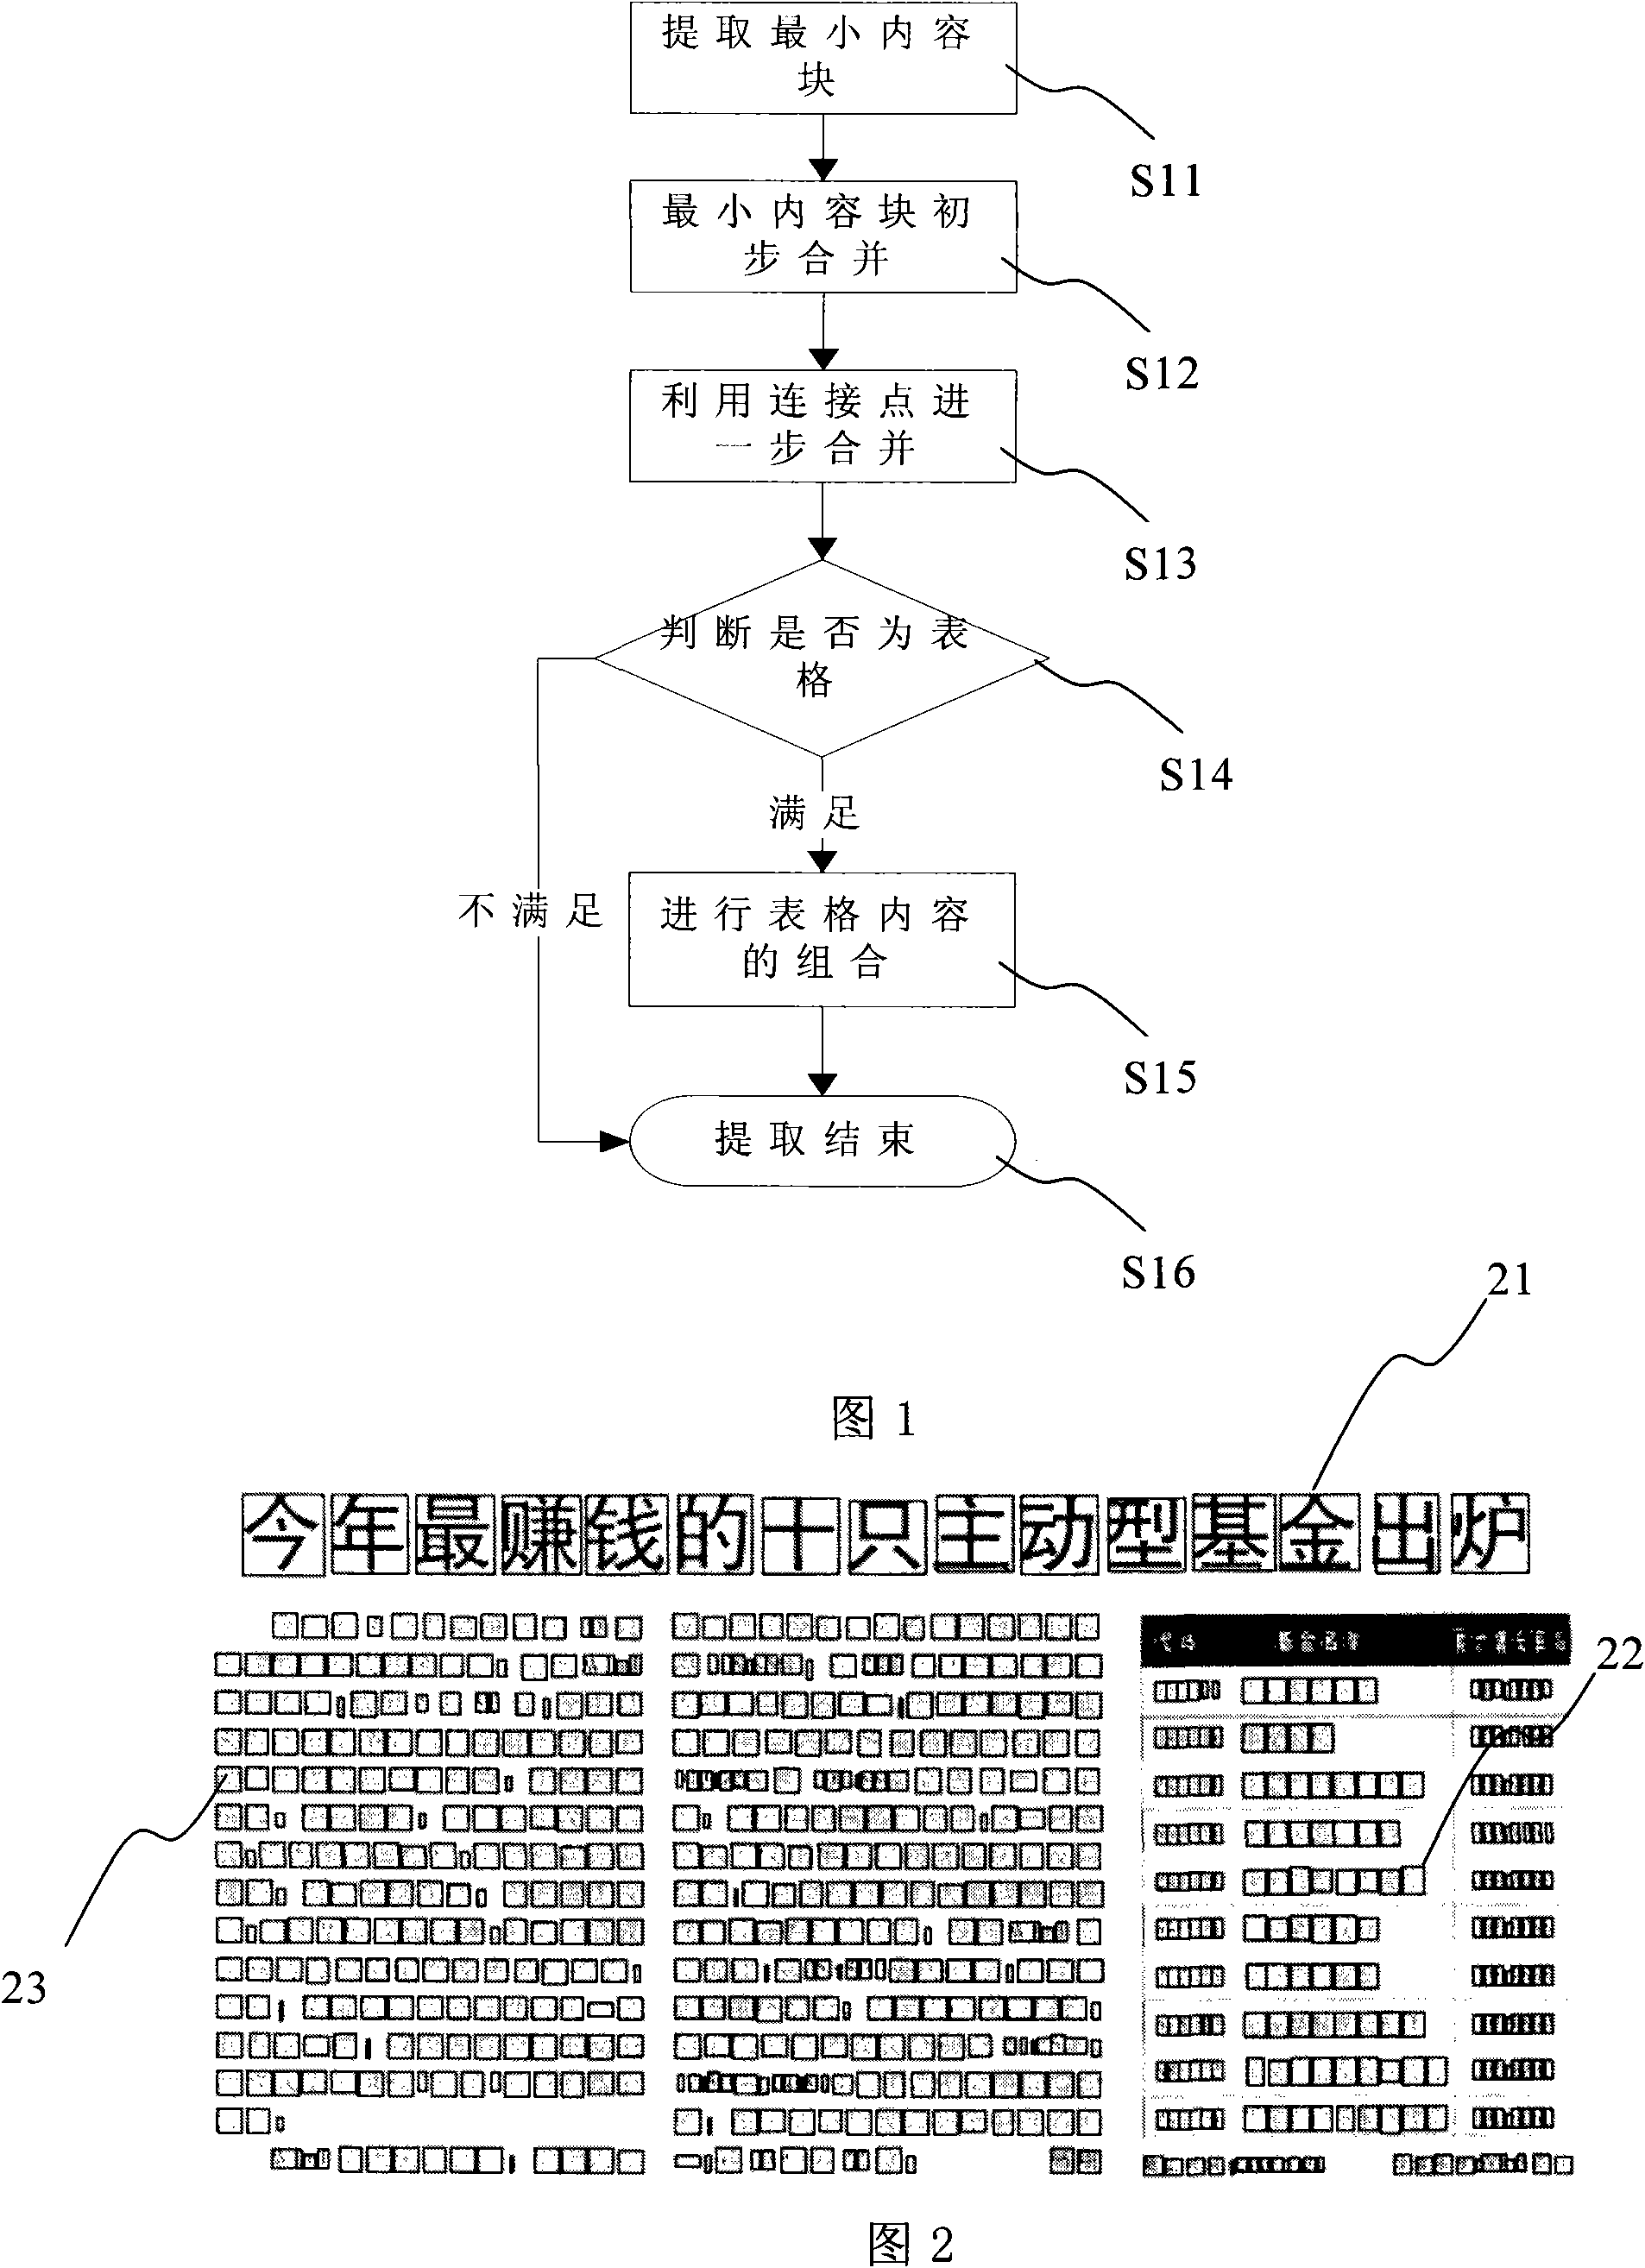 Method and system for identifying form in layout file